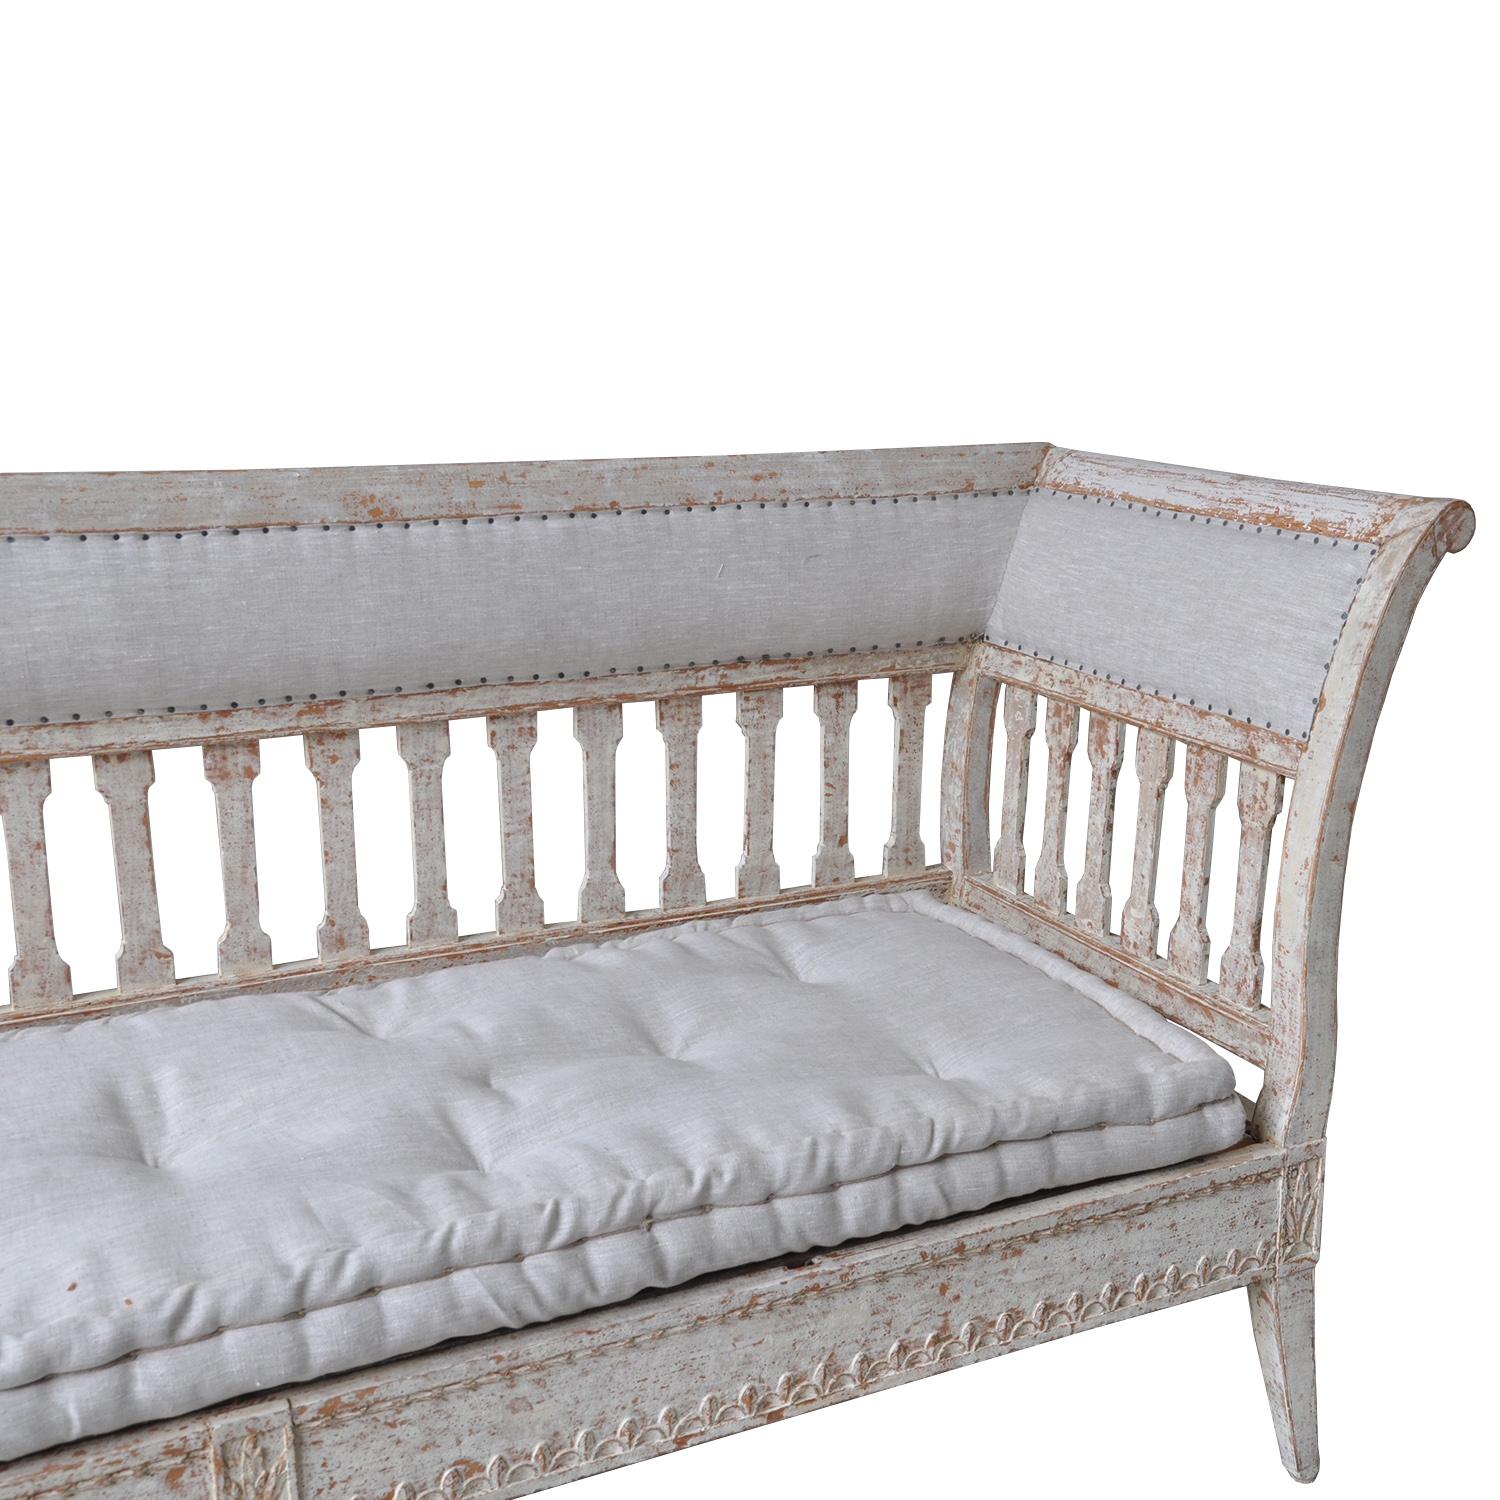 An exceptional quality three meter long Swedish period Gustavian sofa. This piece has been scraped to original paint and reupholstered in linen. From a private home in Vaxjo Smaland.